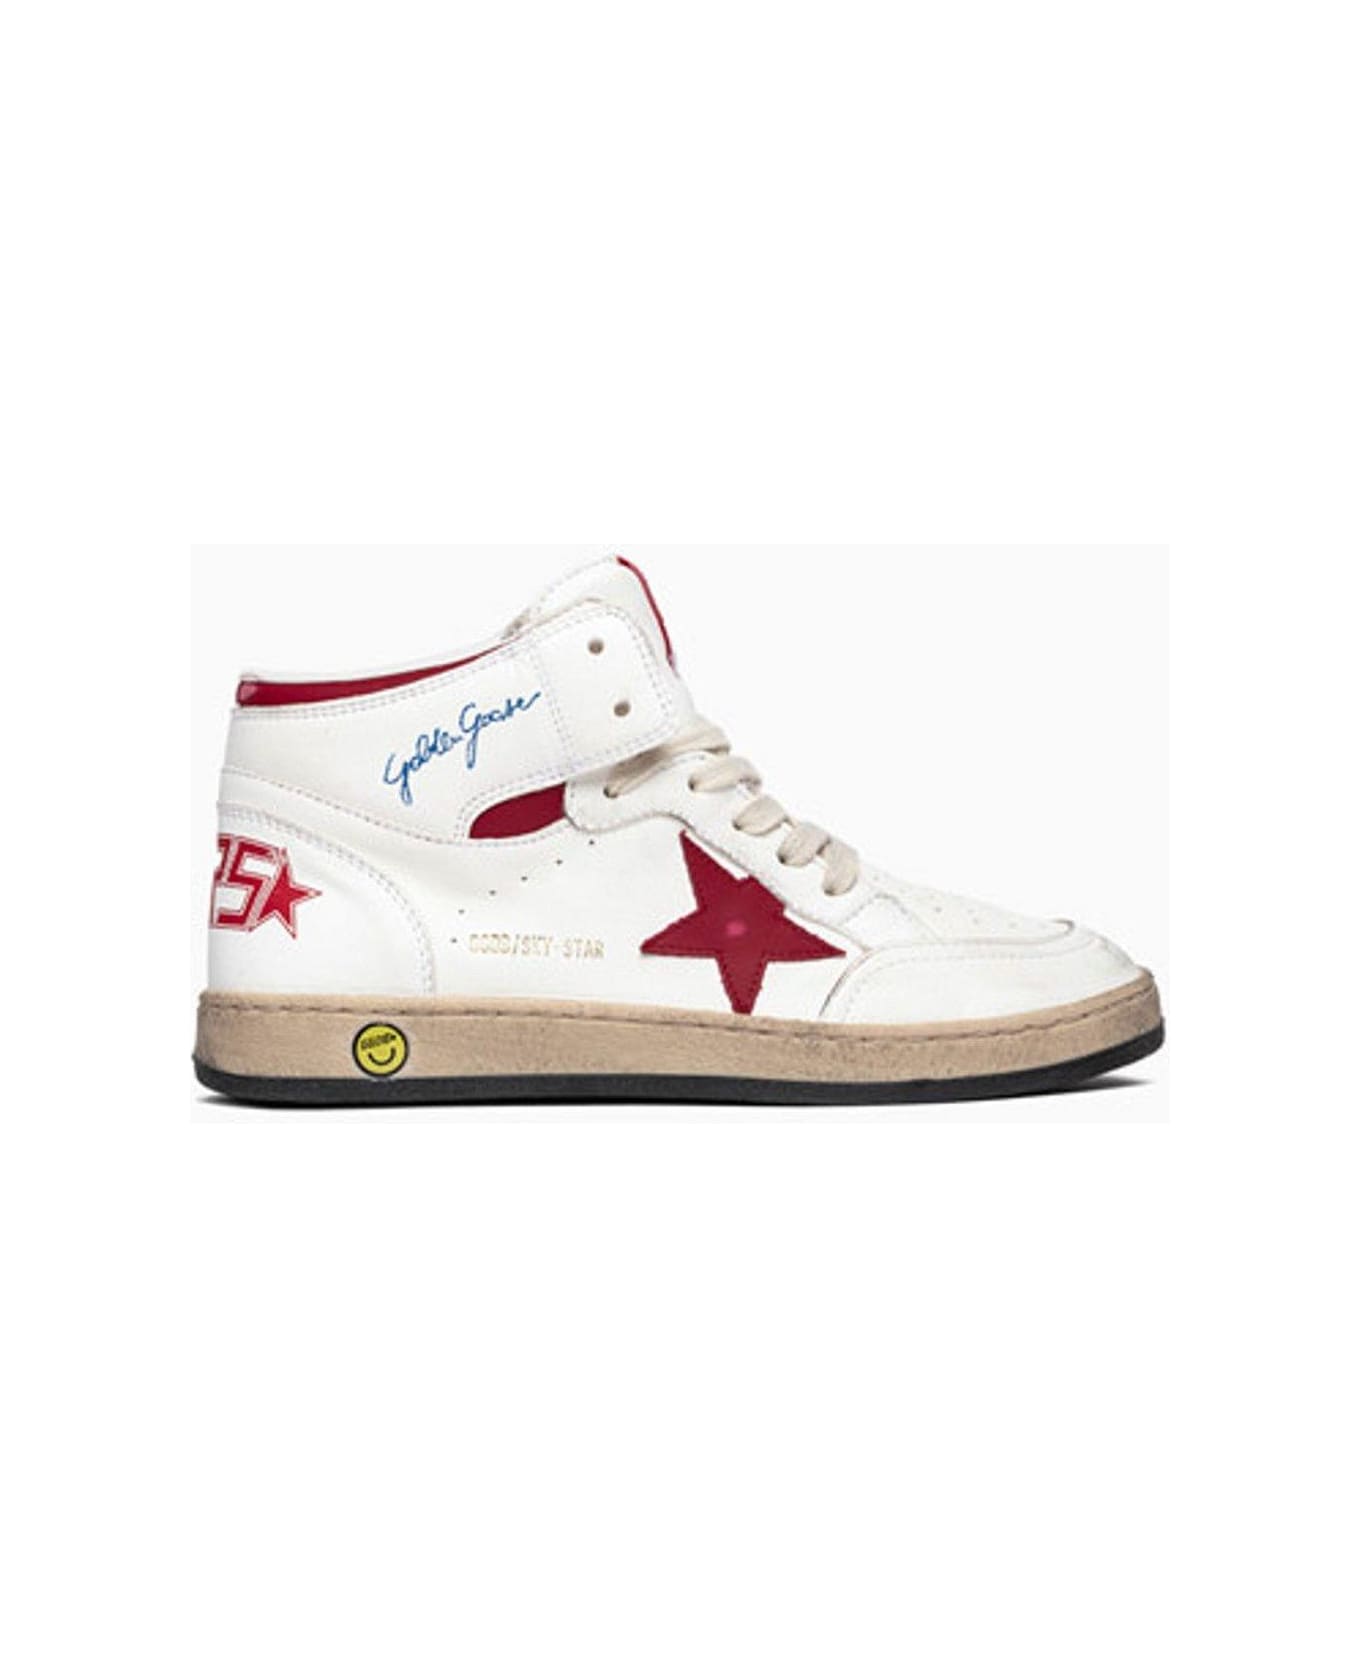 Golden Goose Logo Detailed Lace-up Sneakers - White/red シューズ